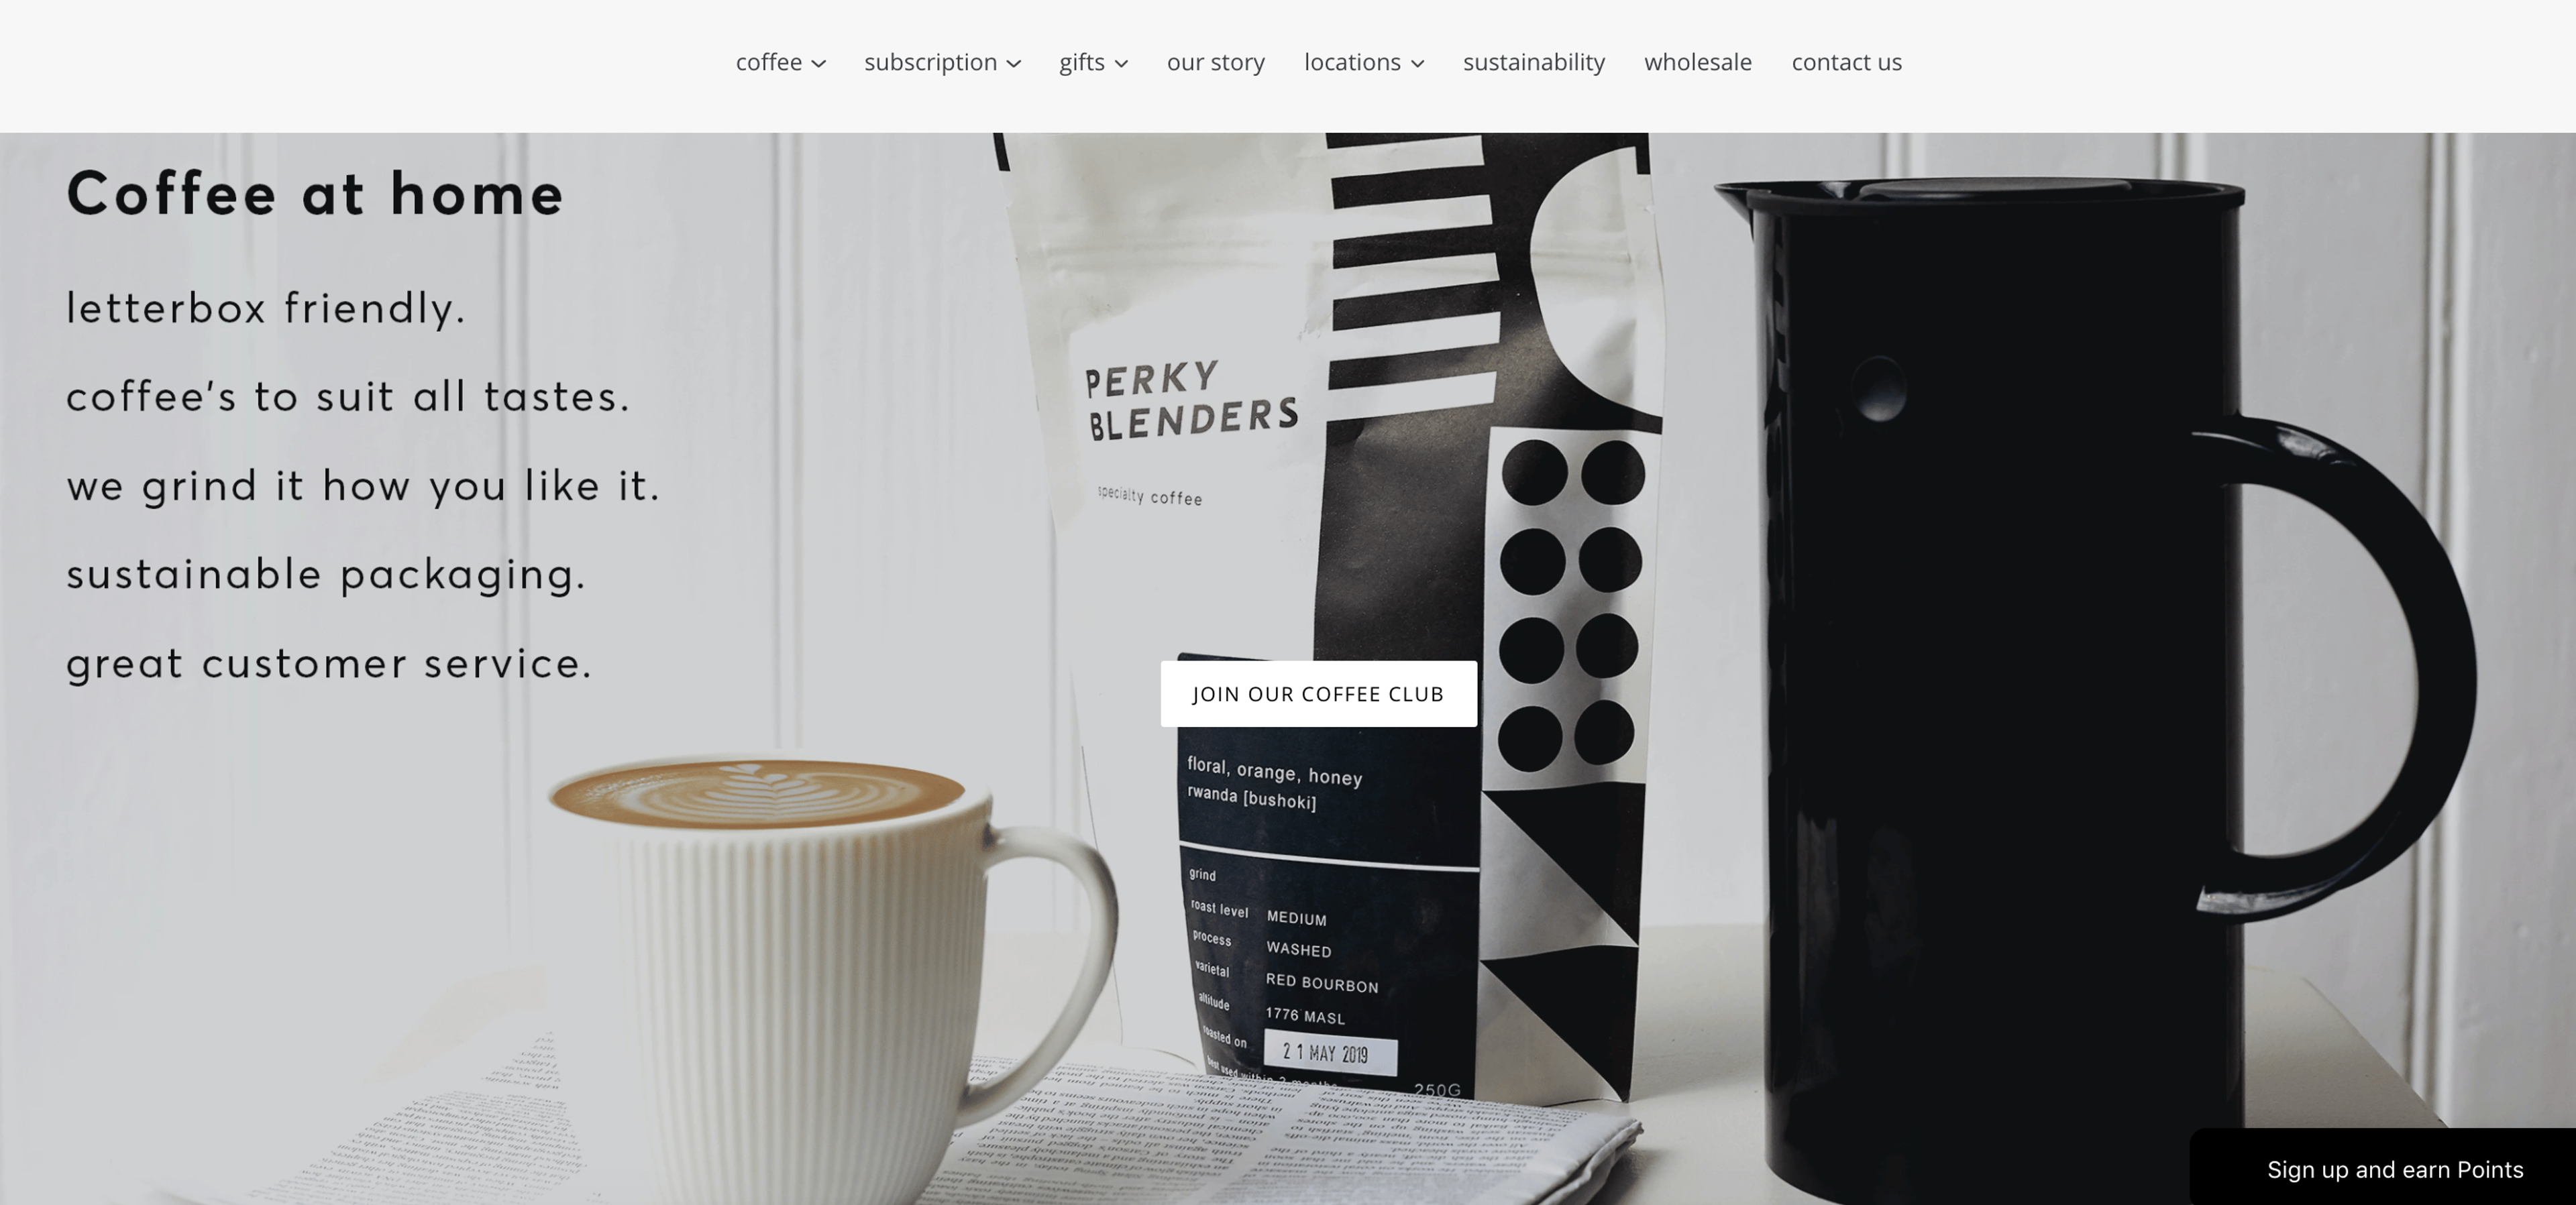 Image of coffee subscription